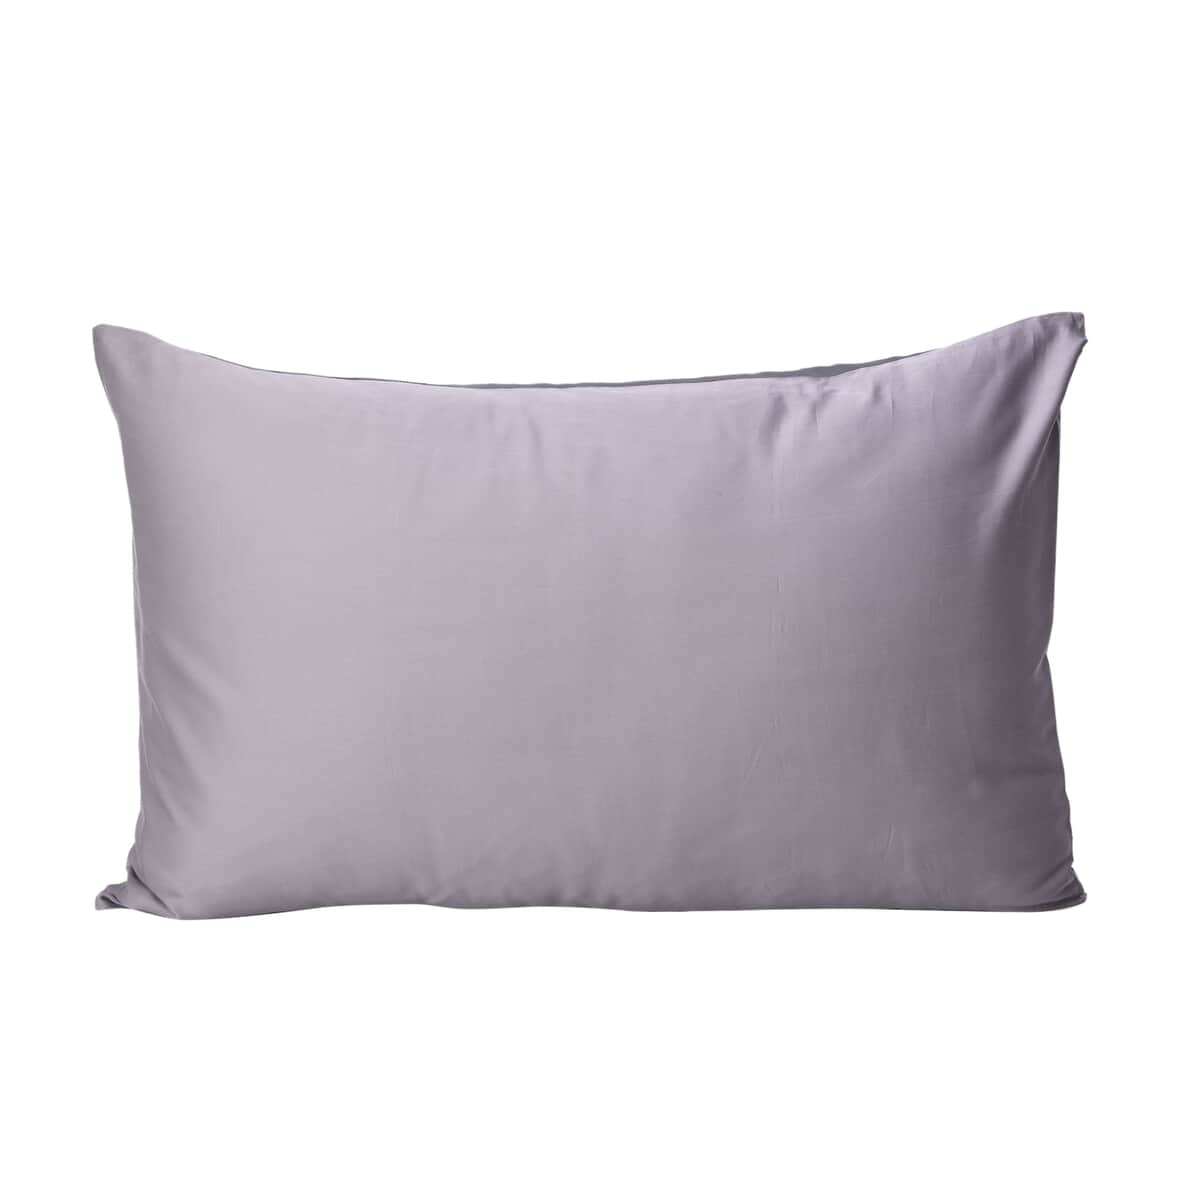 SYMPHONY HOME Gray 100% Mulberry Silk Pillowcase Infused with Hyaluronic Acid & Argan Oil - Full , Pillow Protectors , Pillow Cover , Cushion Cover , Pillow Shams , Pillow Case Covers image number 3